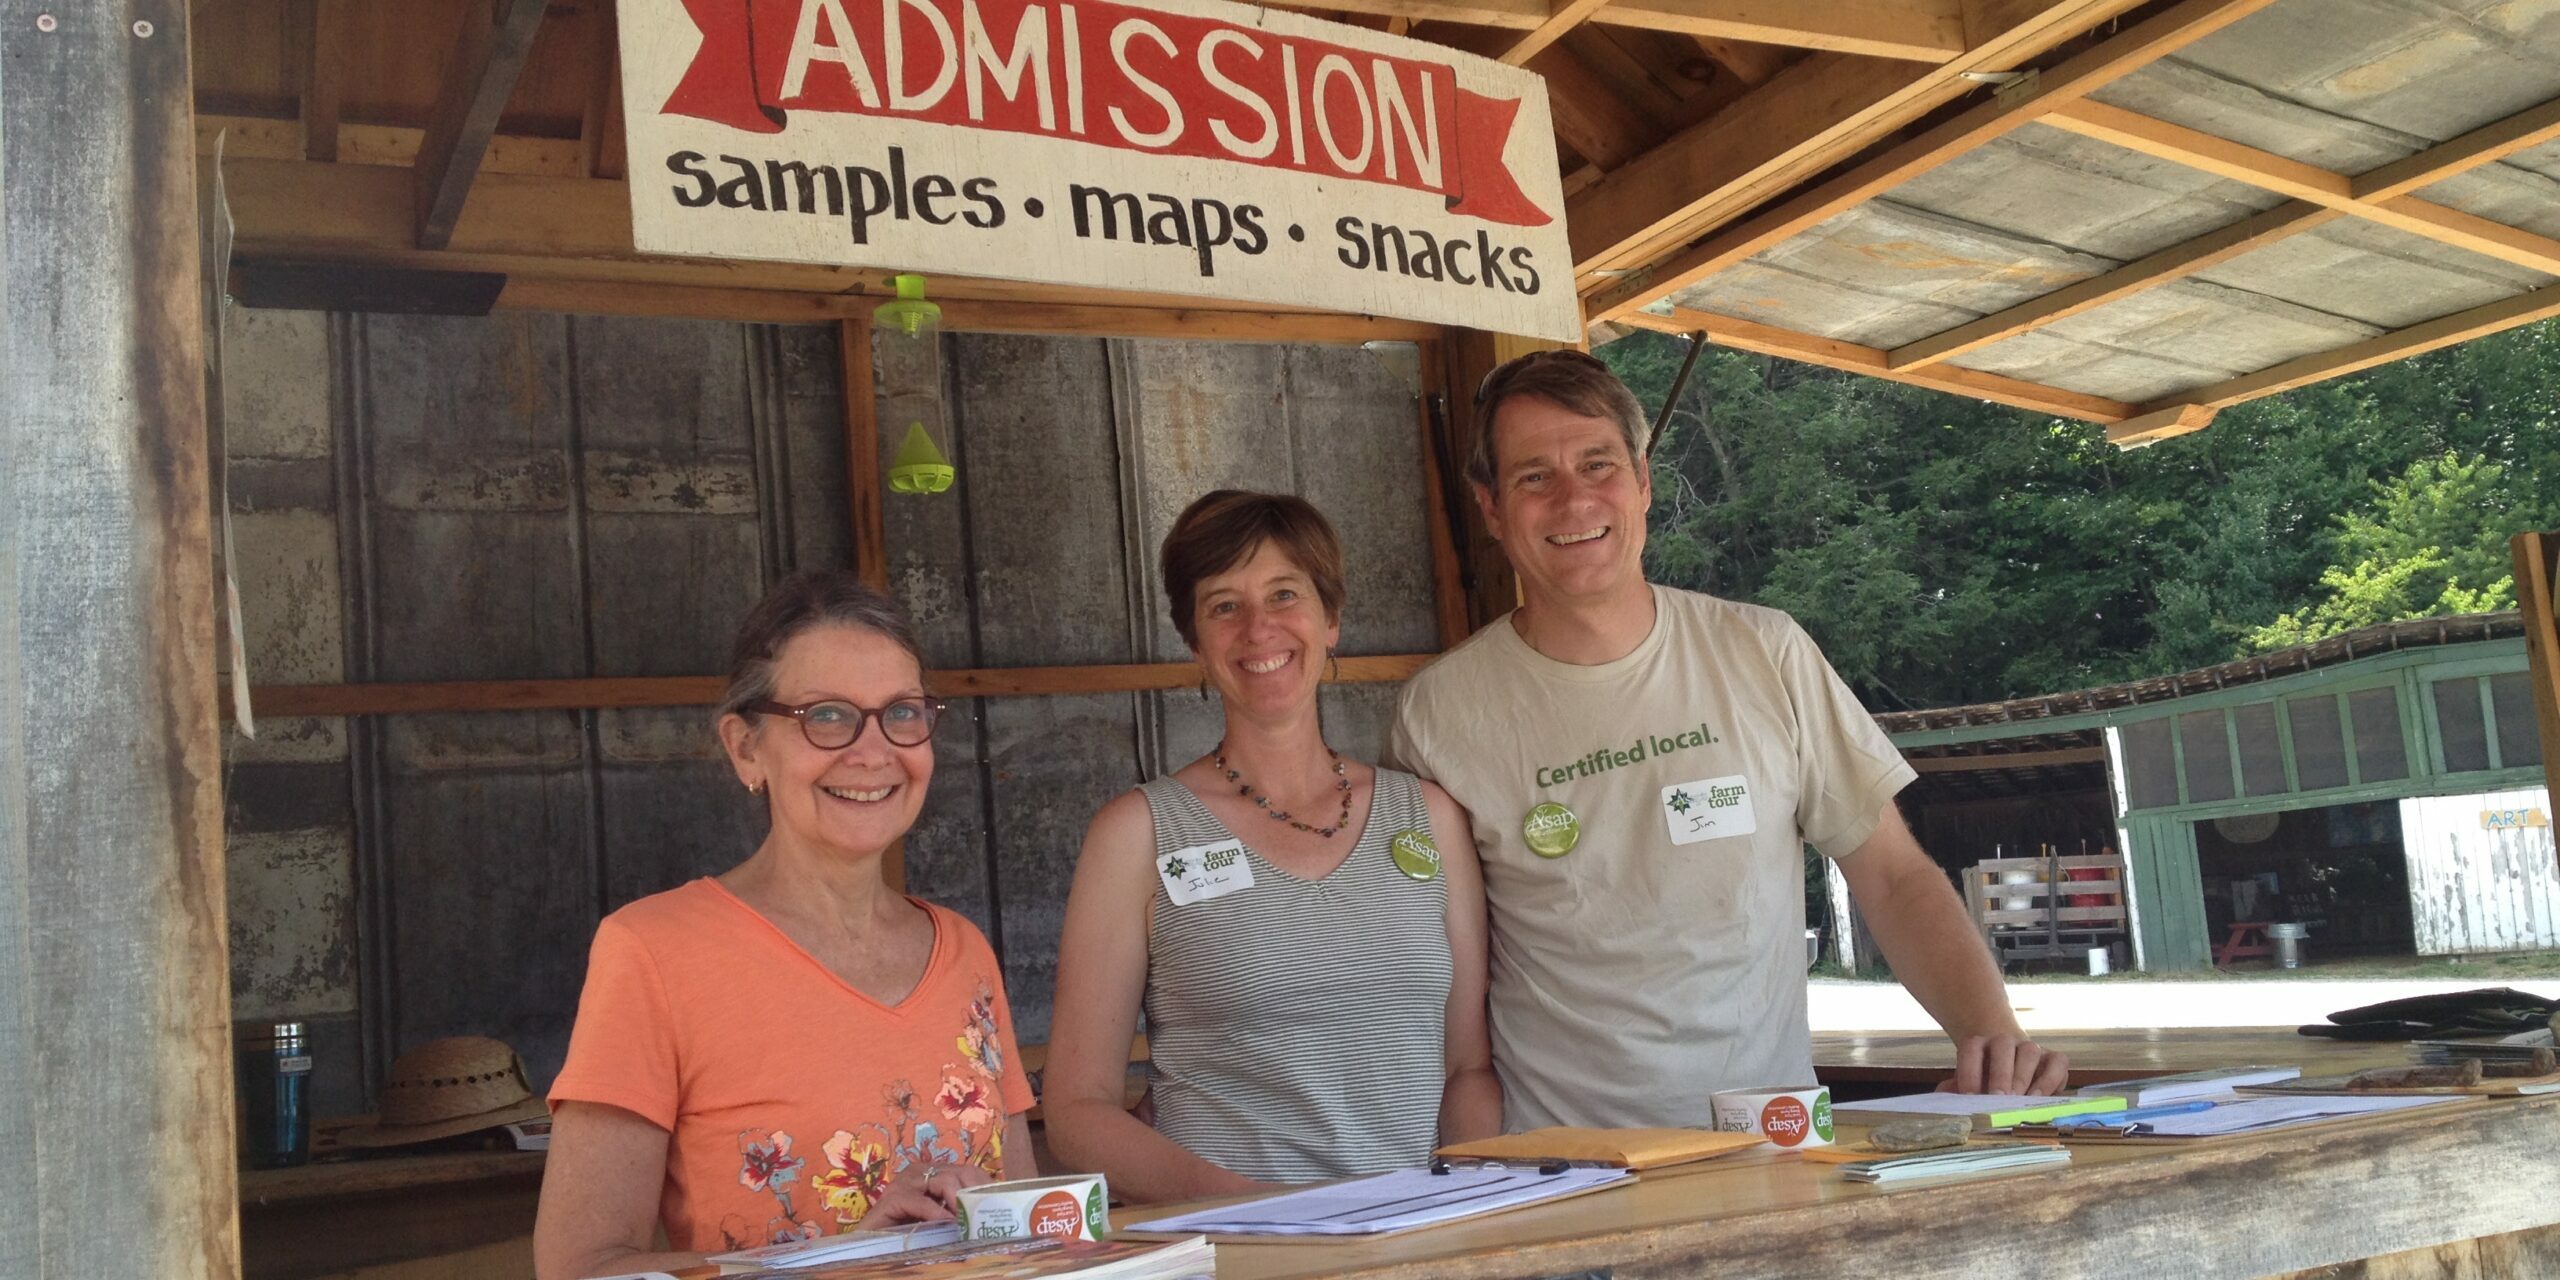 volunteers for ASAP's Farm Tour at Hickory Nut Gap Farm